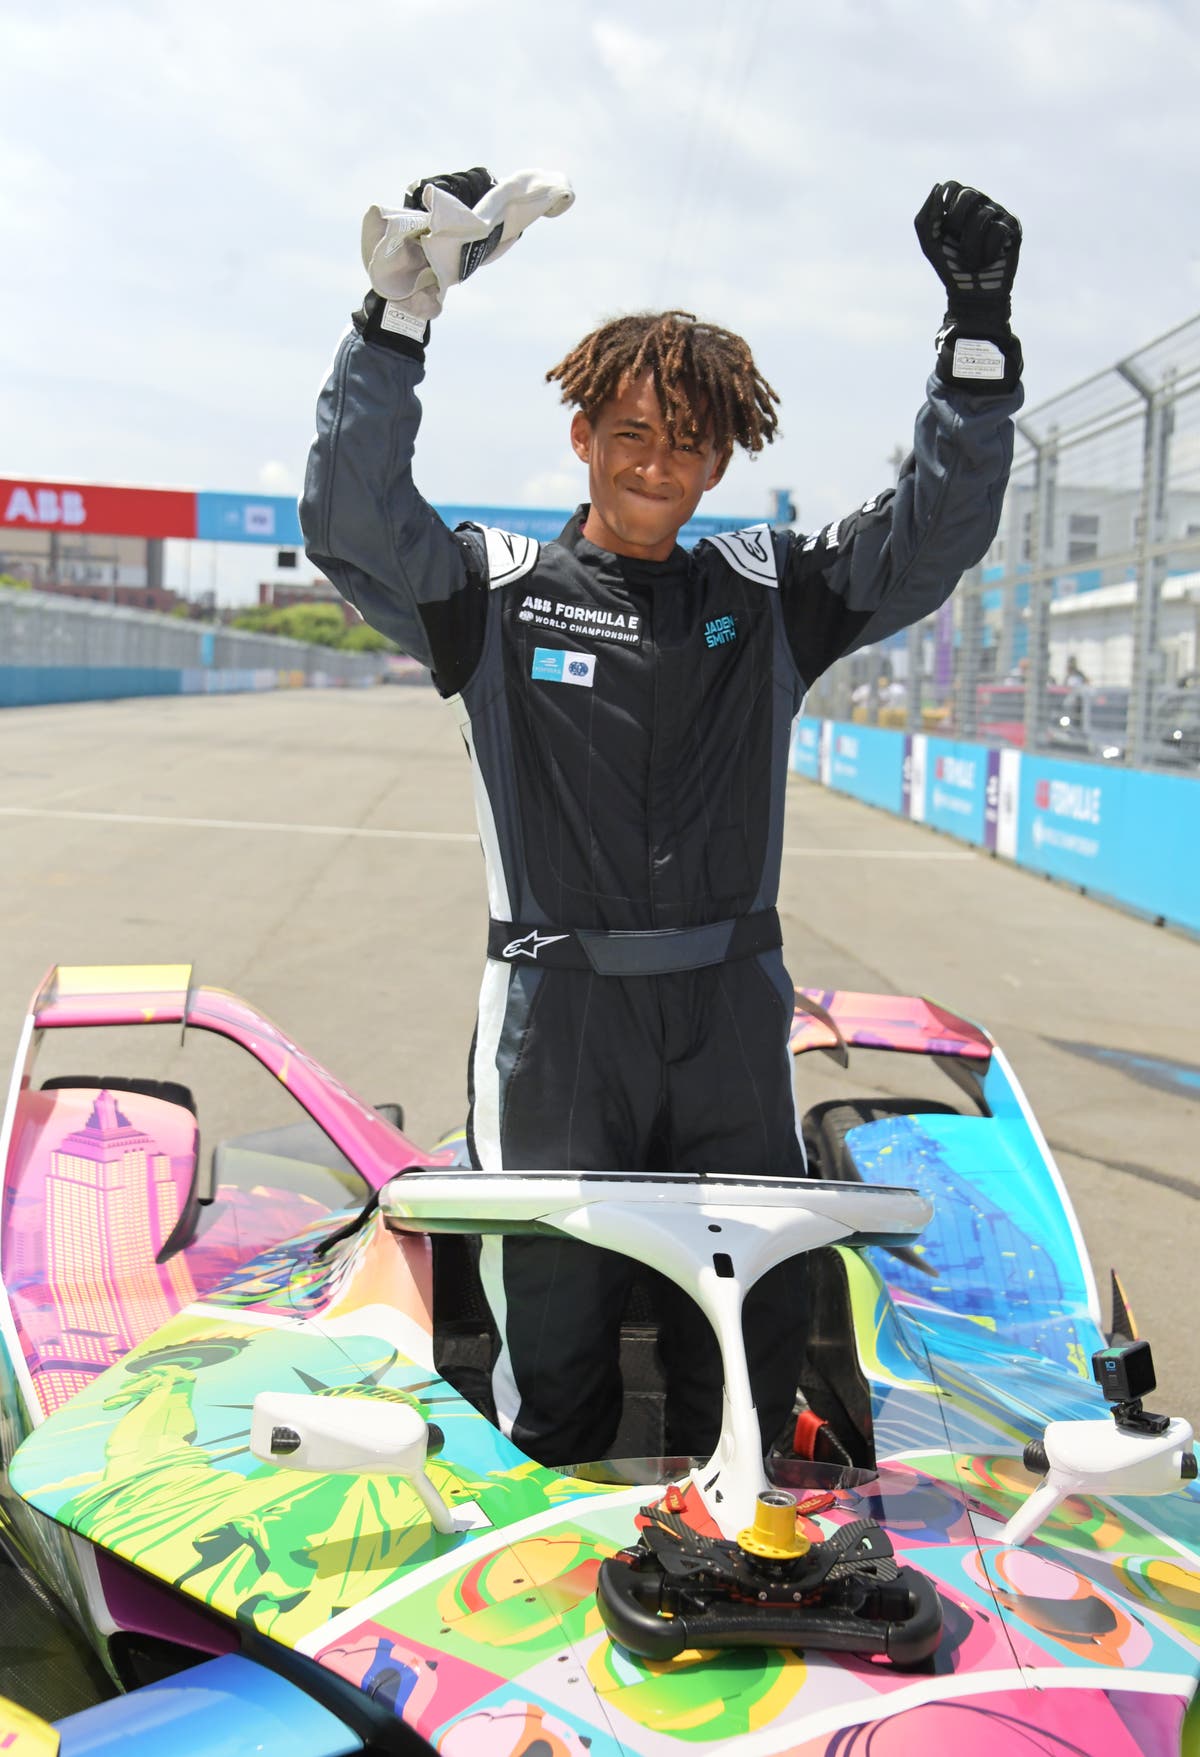 Jaden Smith says Formula E will one day be more popular than